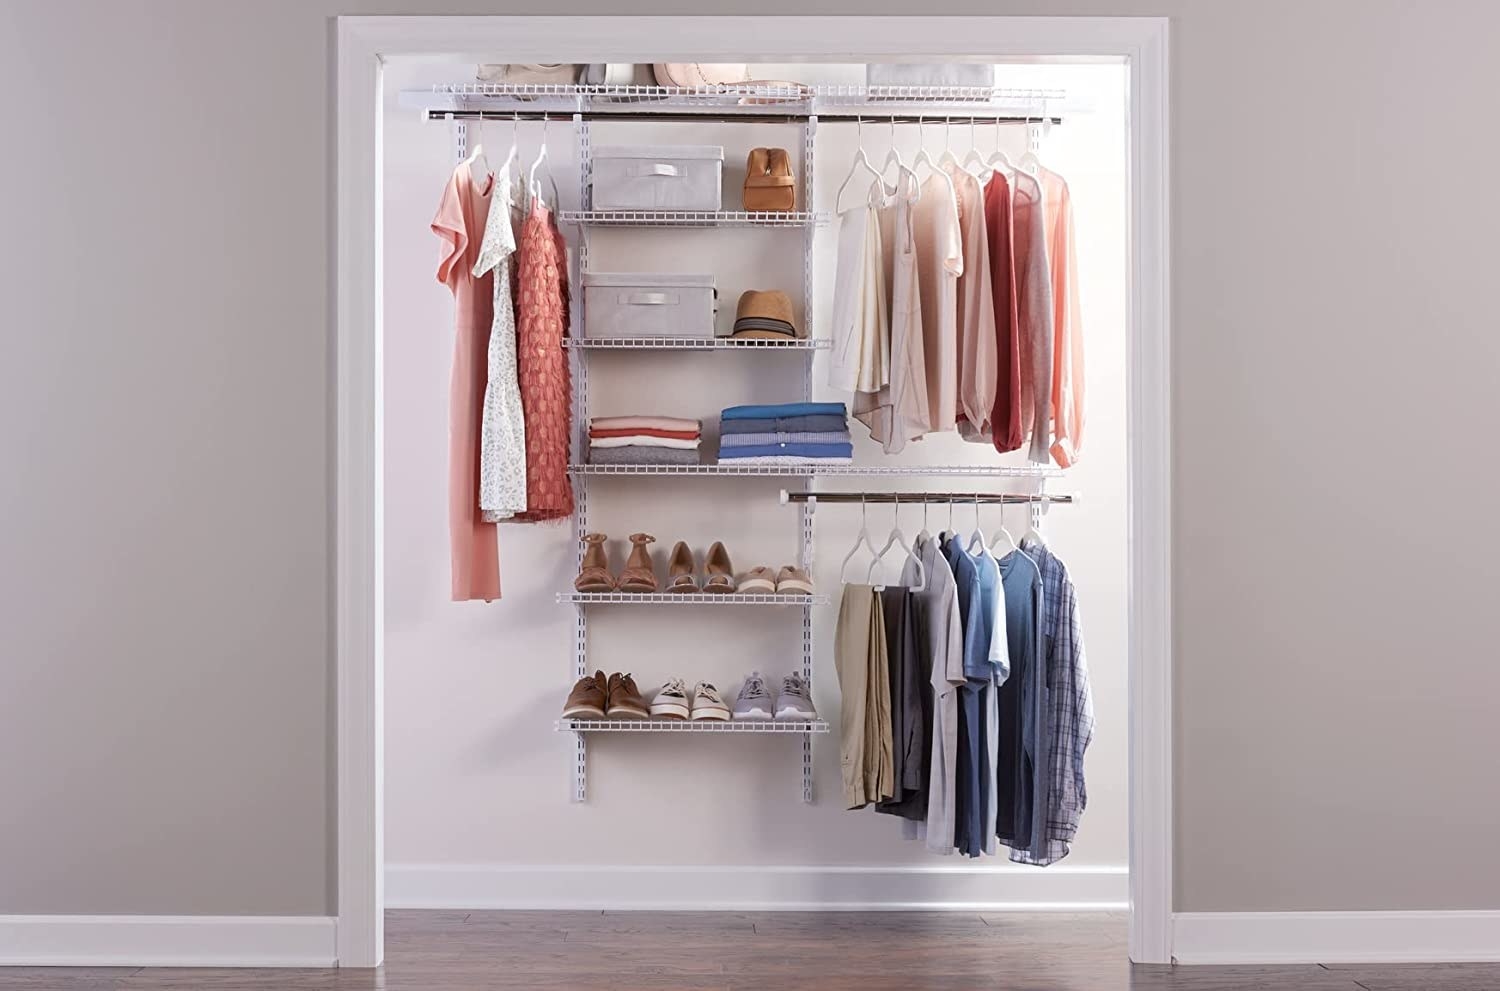 The system in a closet with clothes hanging